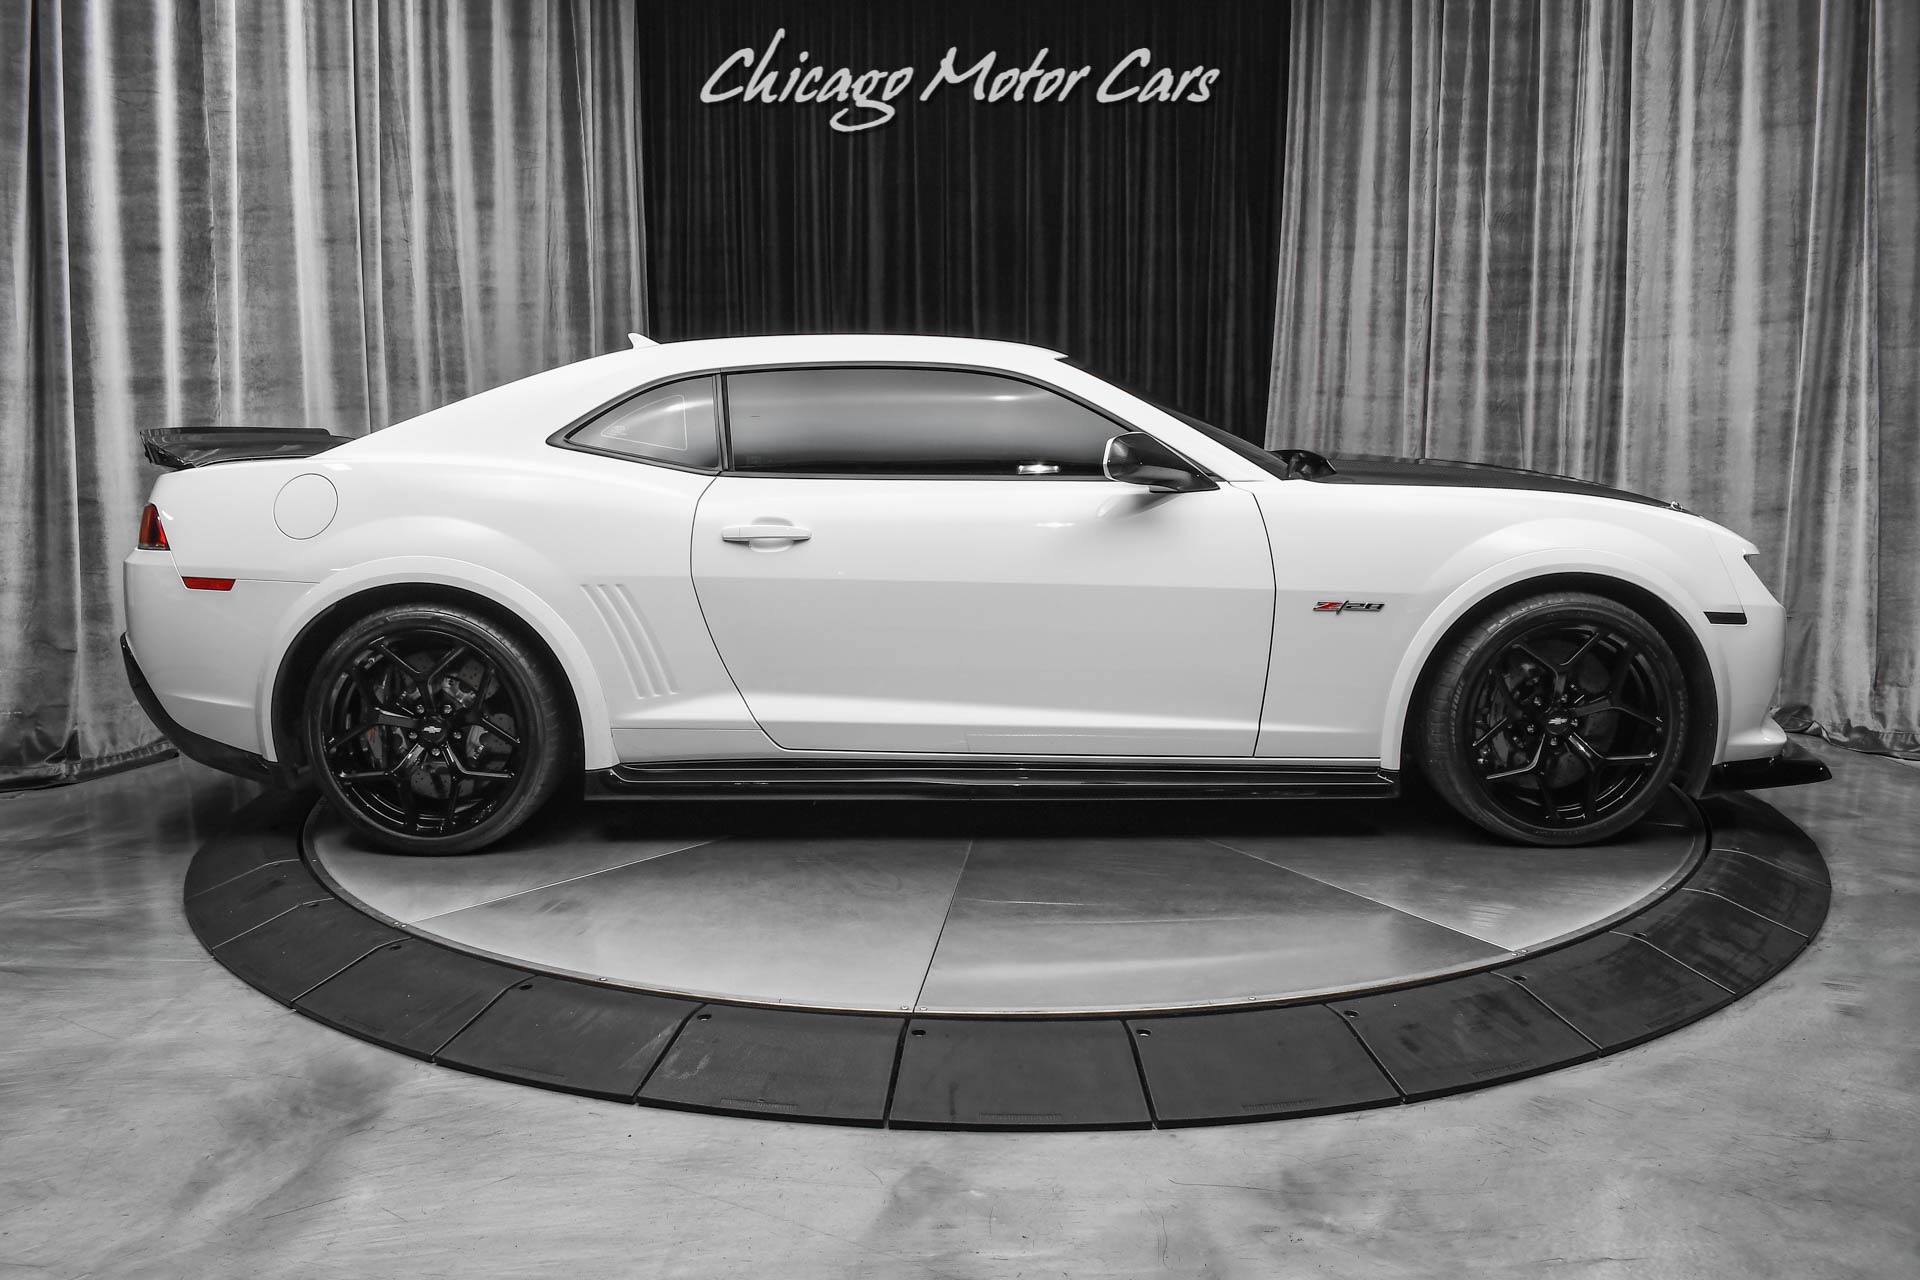 Used-2015-Chevrolet-Camaro-Z28-Coupe-Summit-White-6-Speed-Manual-Highly-Desired-LOW-Miles